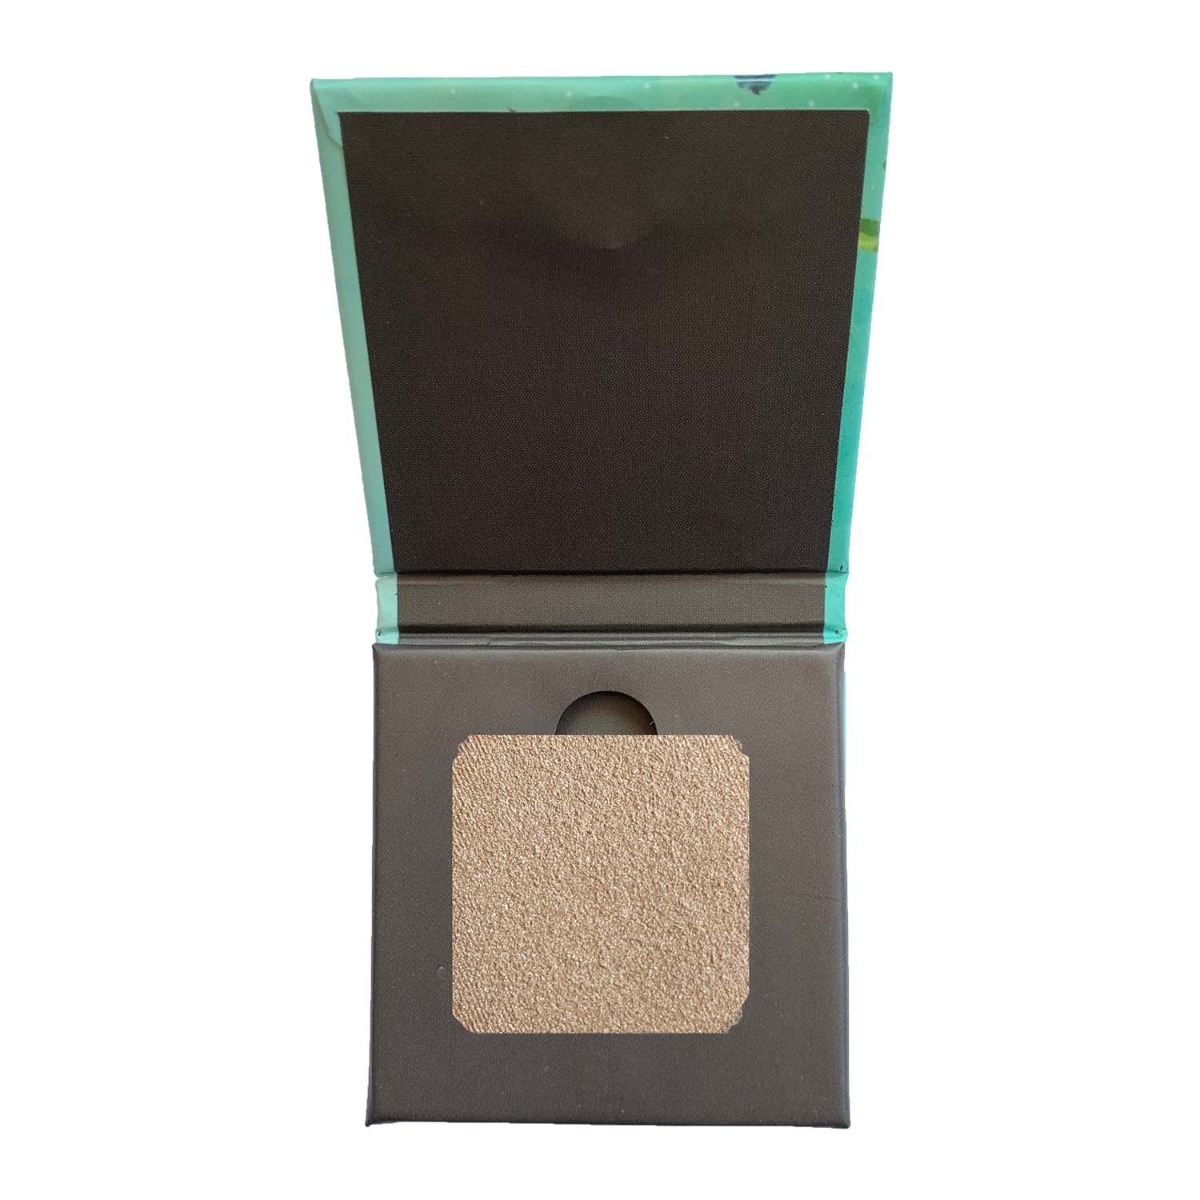 Disguise Cosmetics Satin Smooth Eyeshadow Squares - 201 Frosted Cream Cashew, 4.5gm